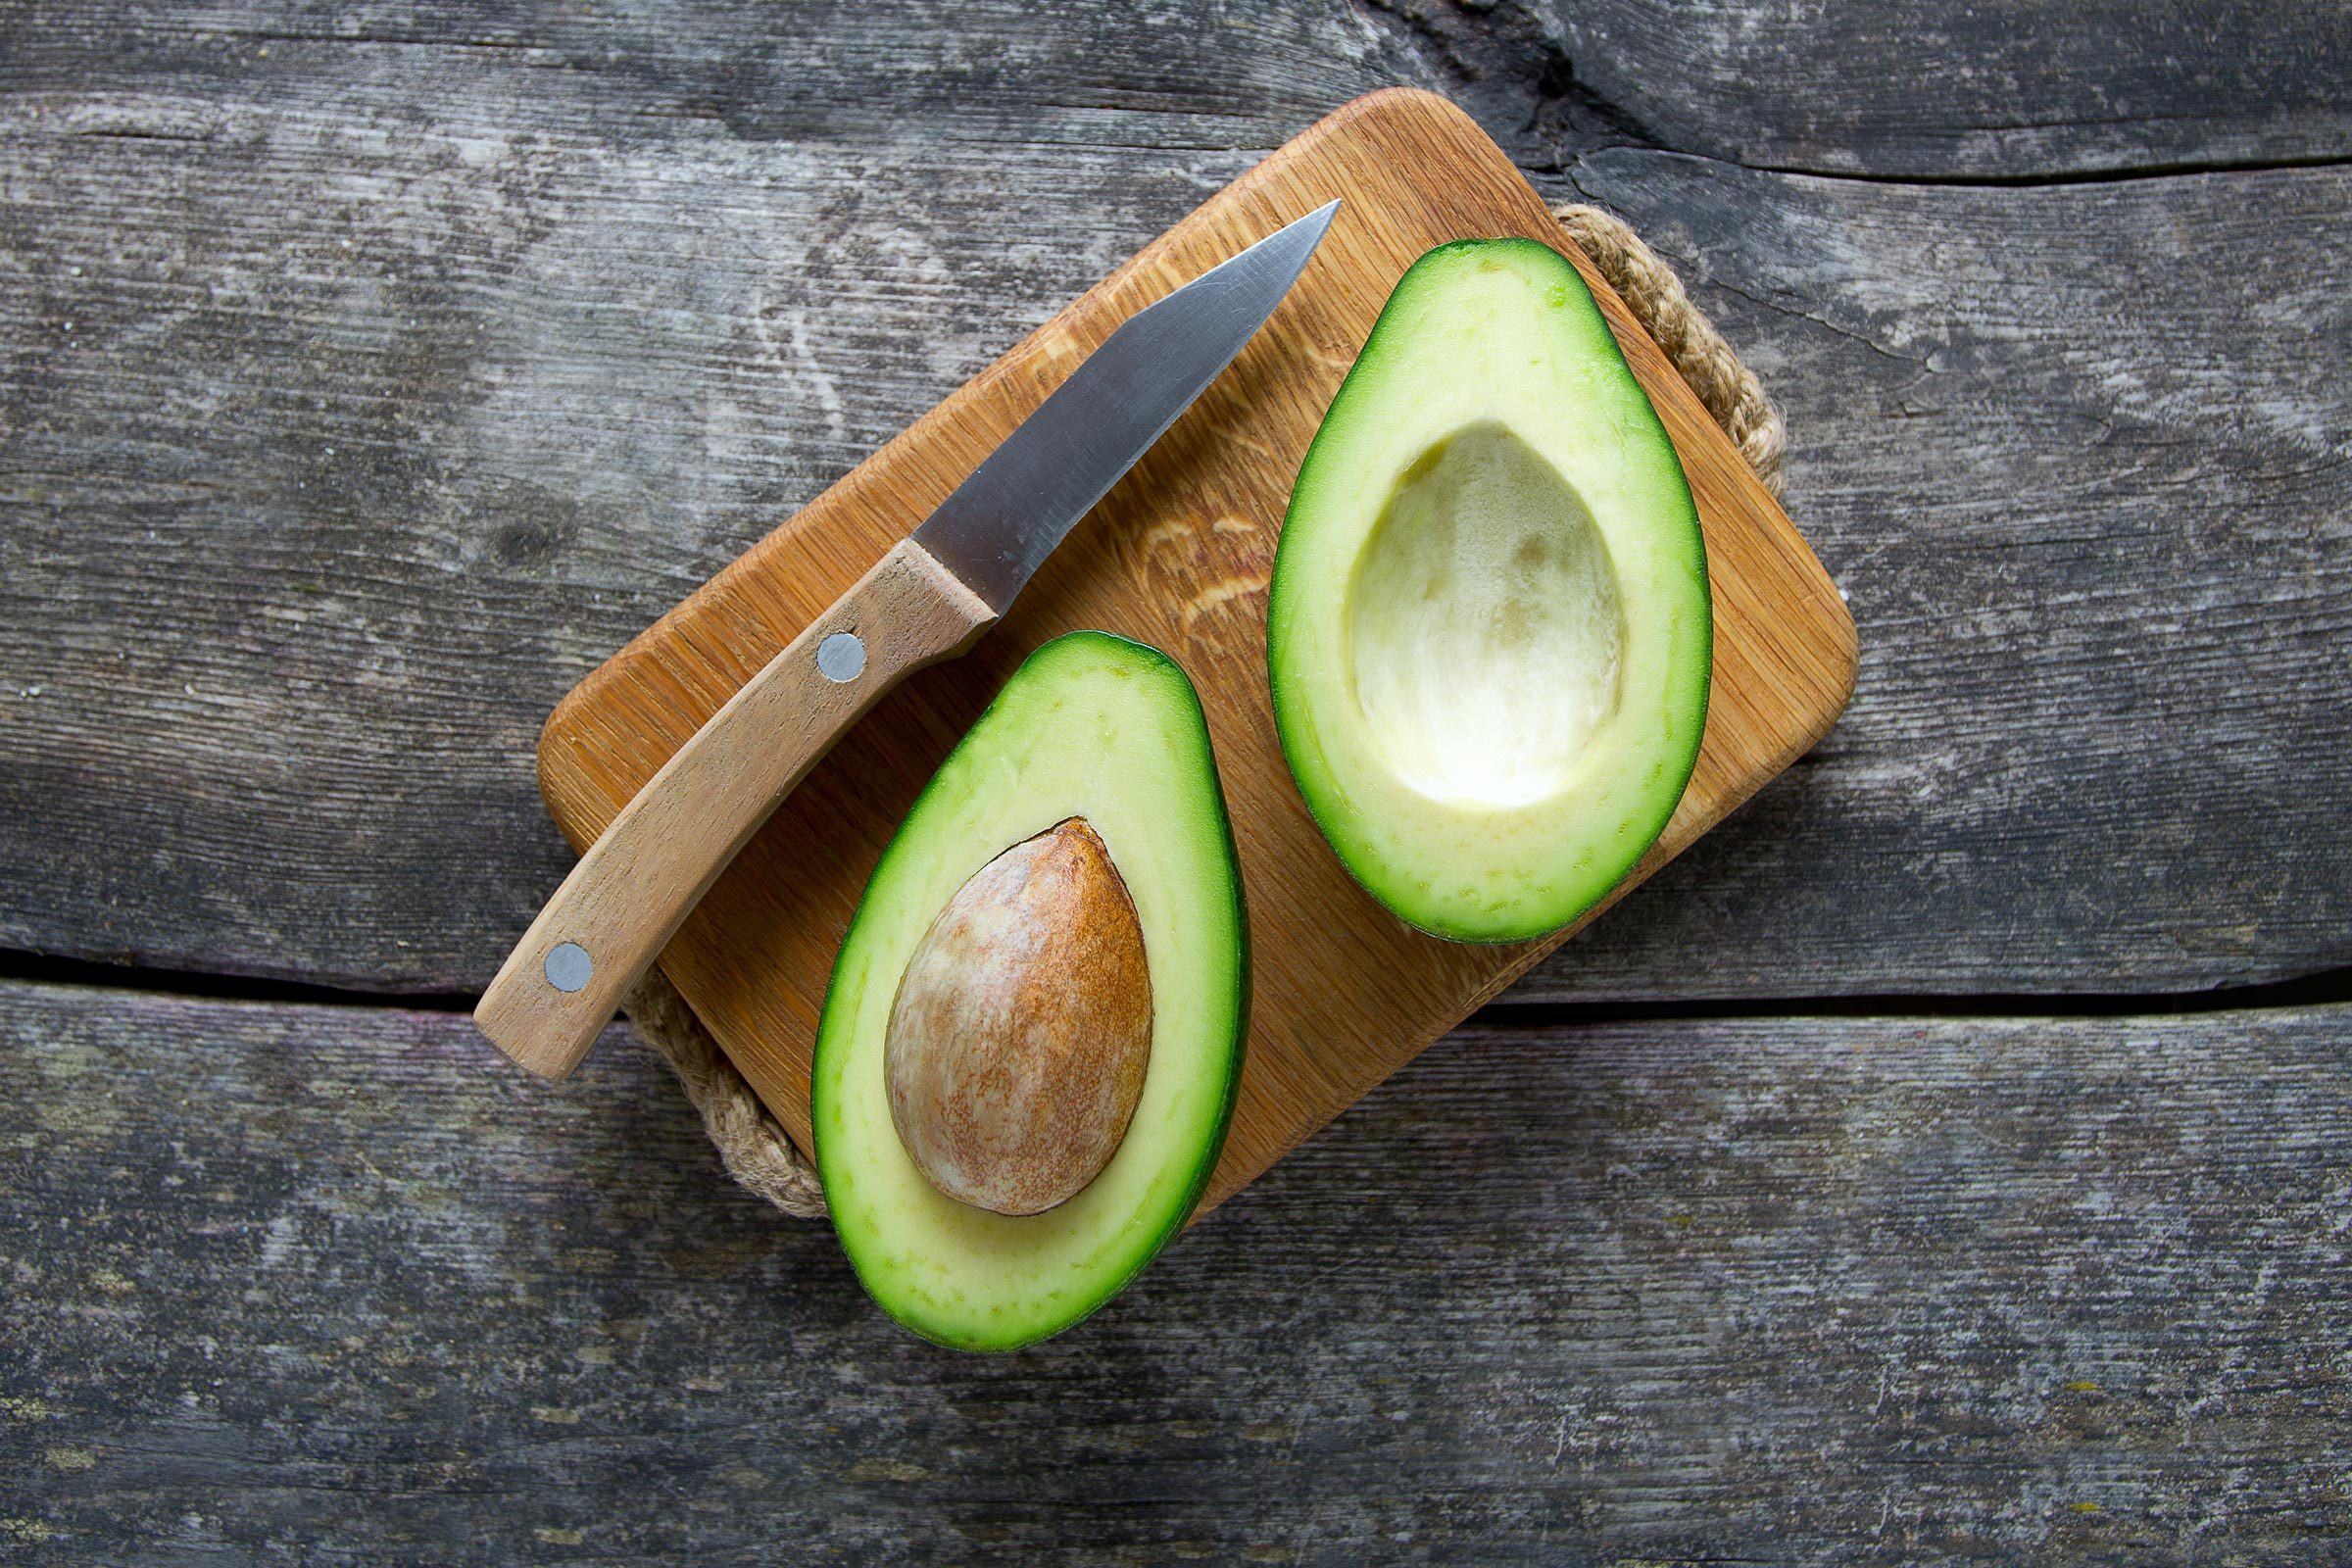 Here's Why You Shouldn't Use a Metal Knife to Cut an Avocado